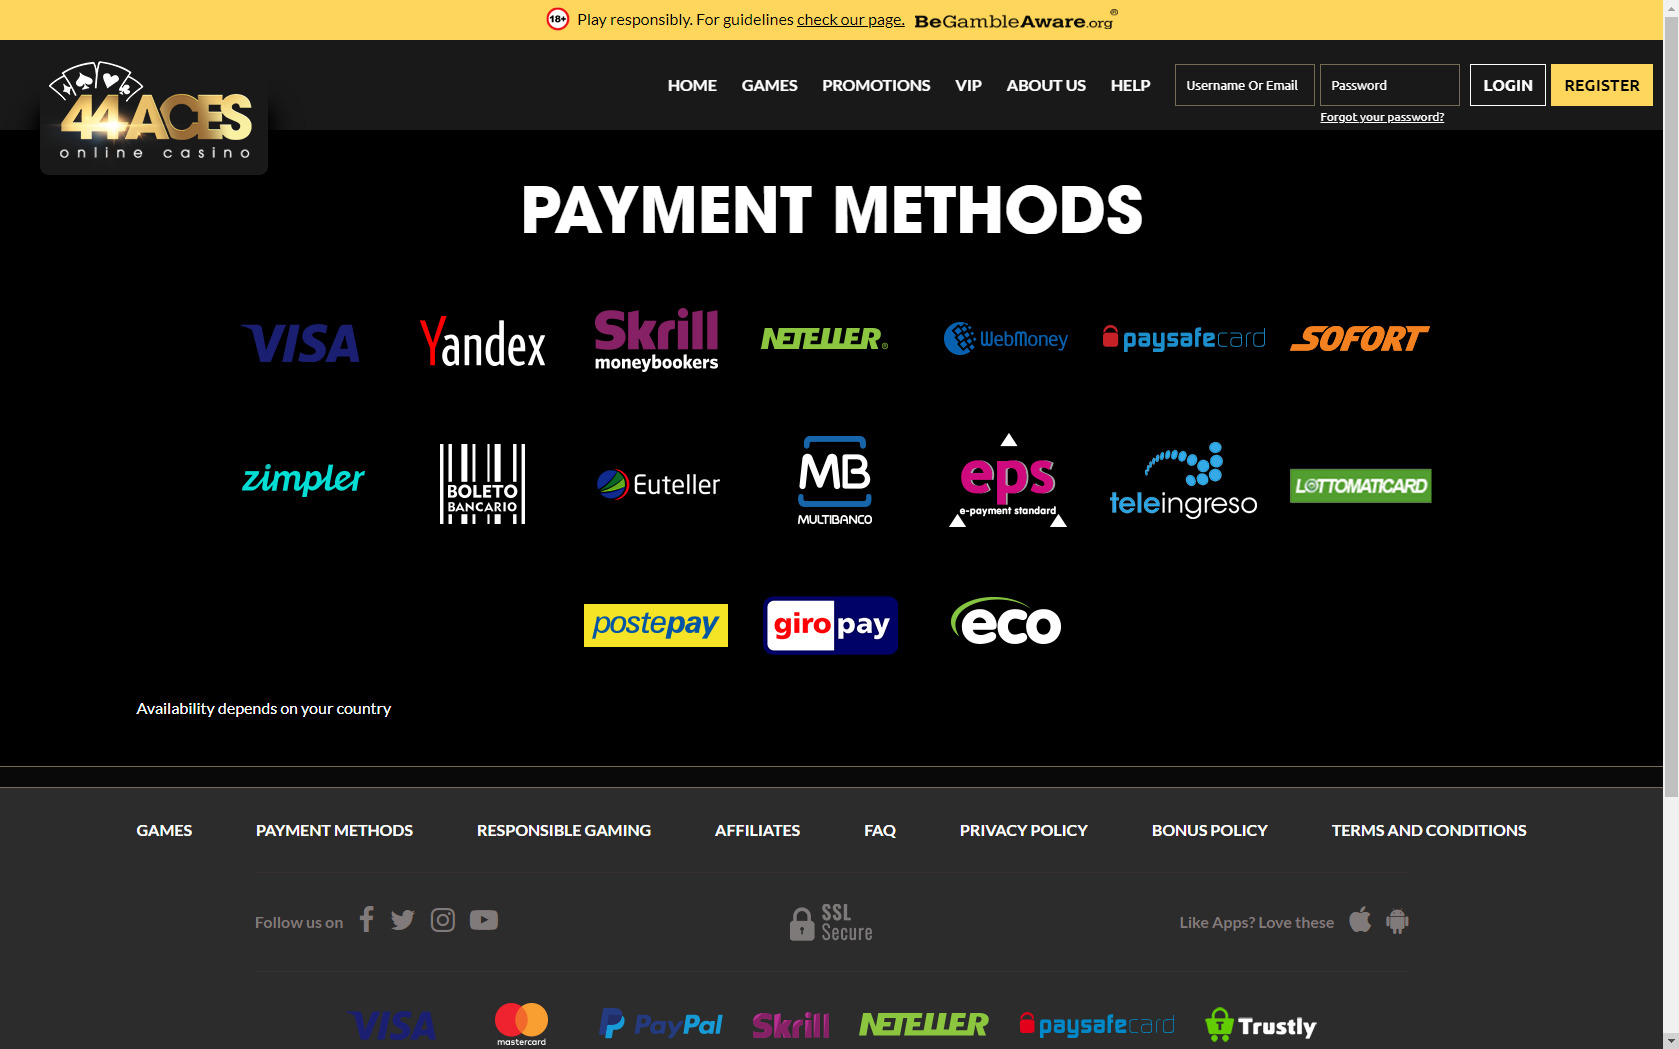 44Aces Payment Methods